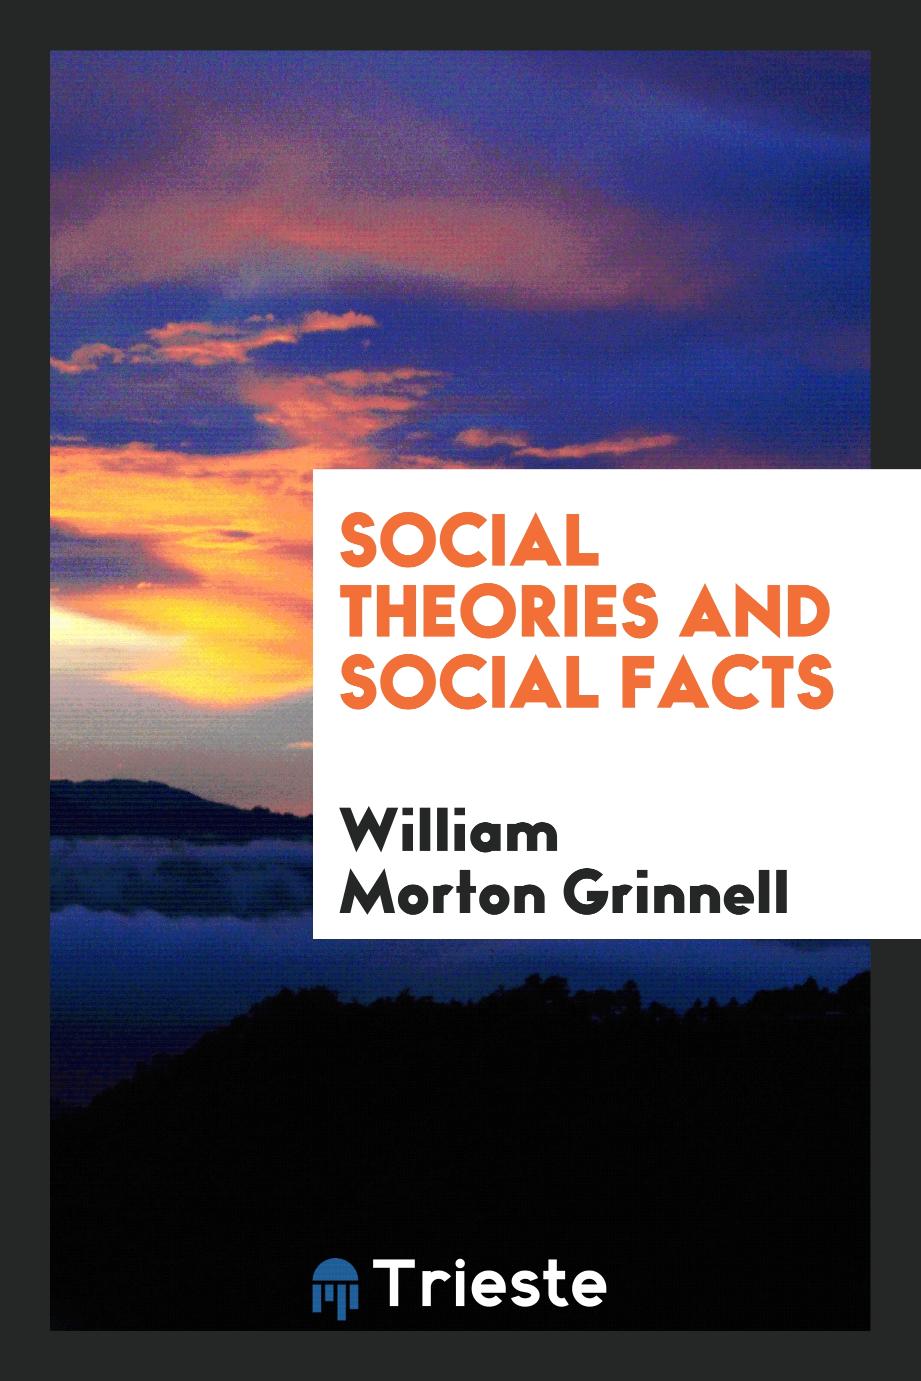 Social Theories and Social Facts